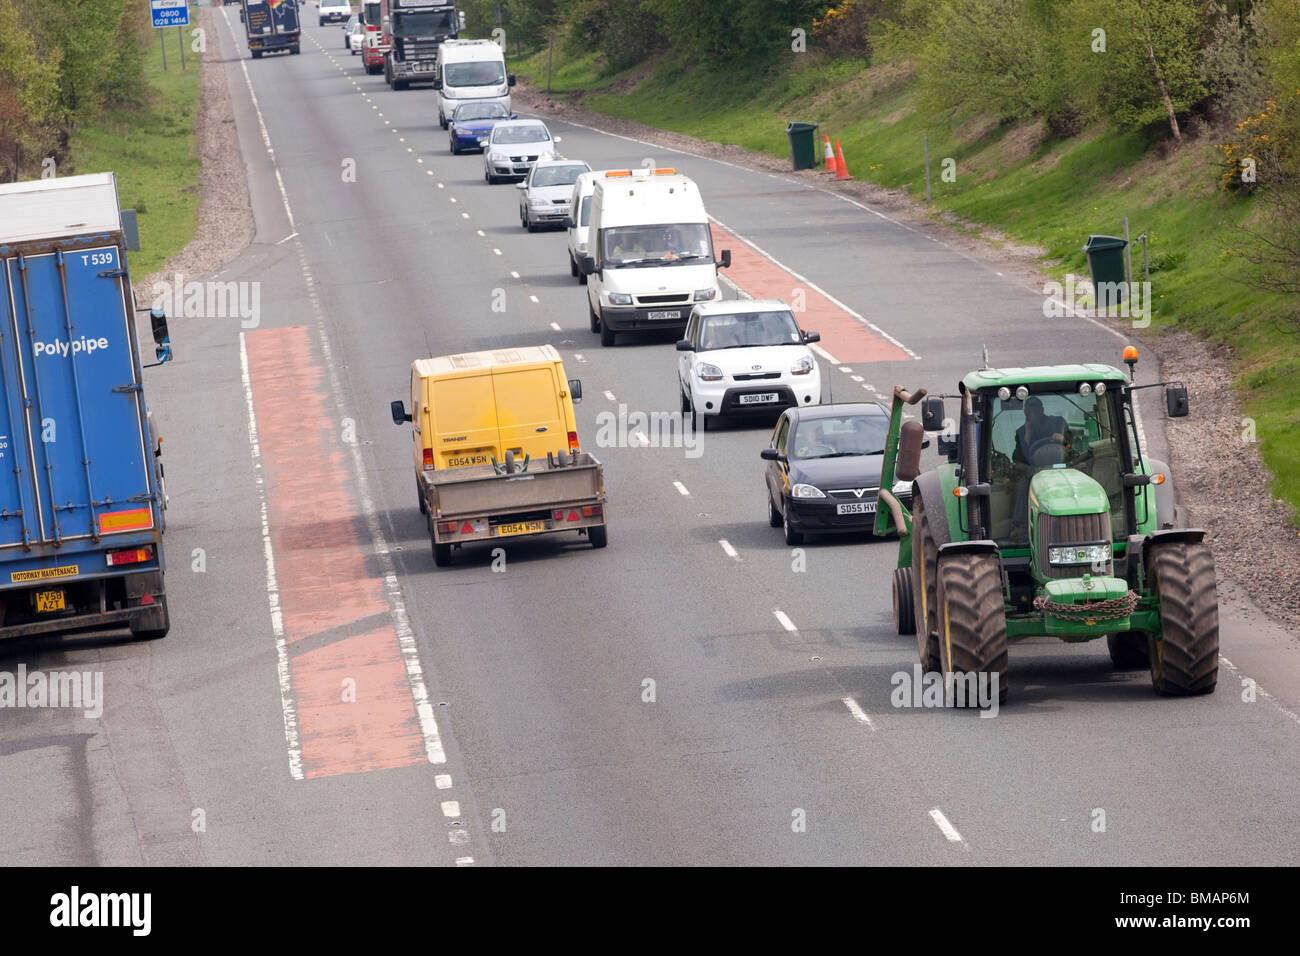 A queue of traffic behind a slow moving vehicle tractor on the A75 road near Dumfries Dumfries and Galloway Scotland UK Stock Photo